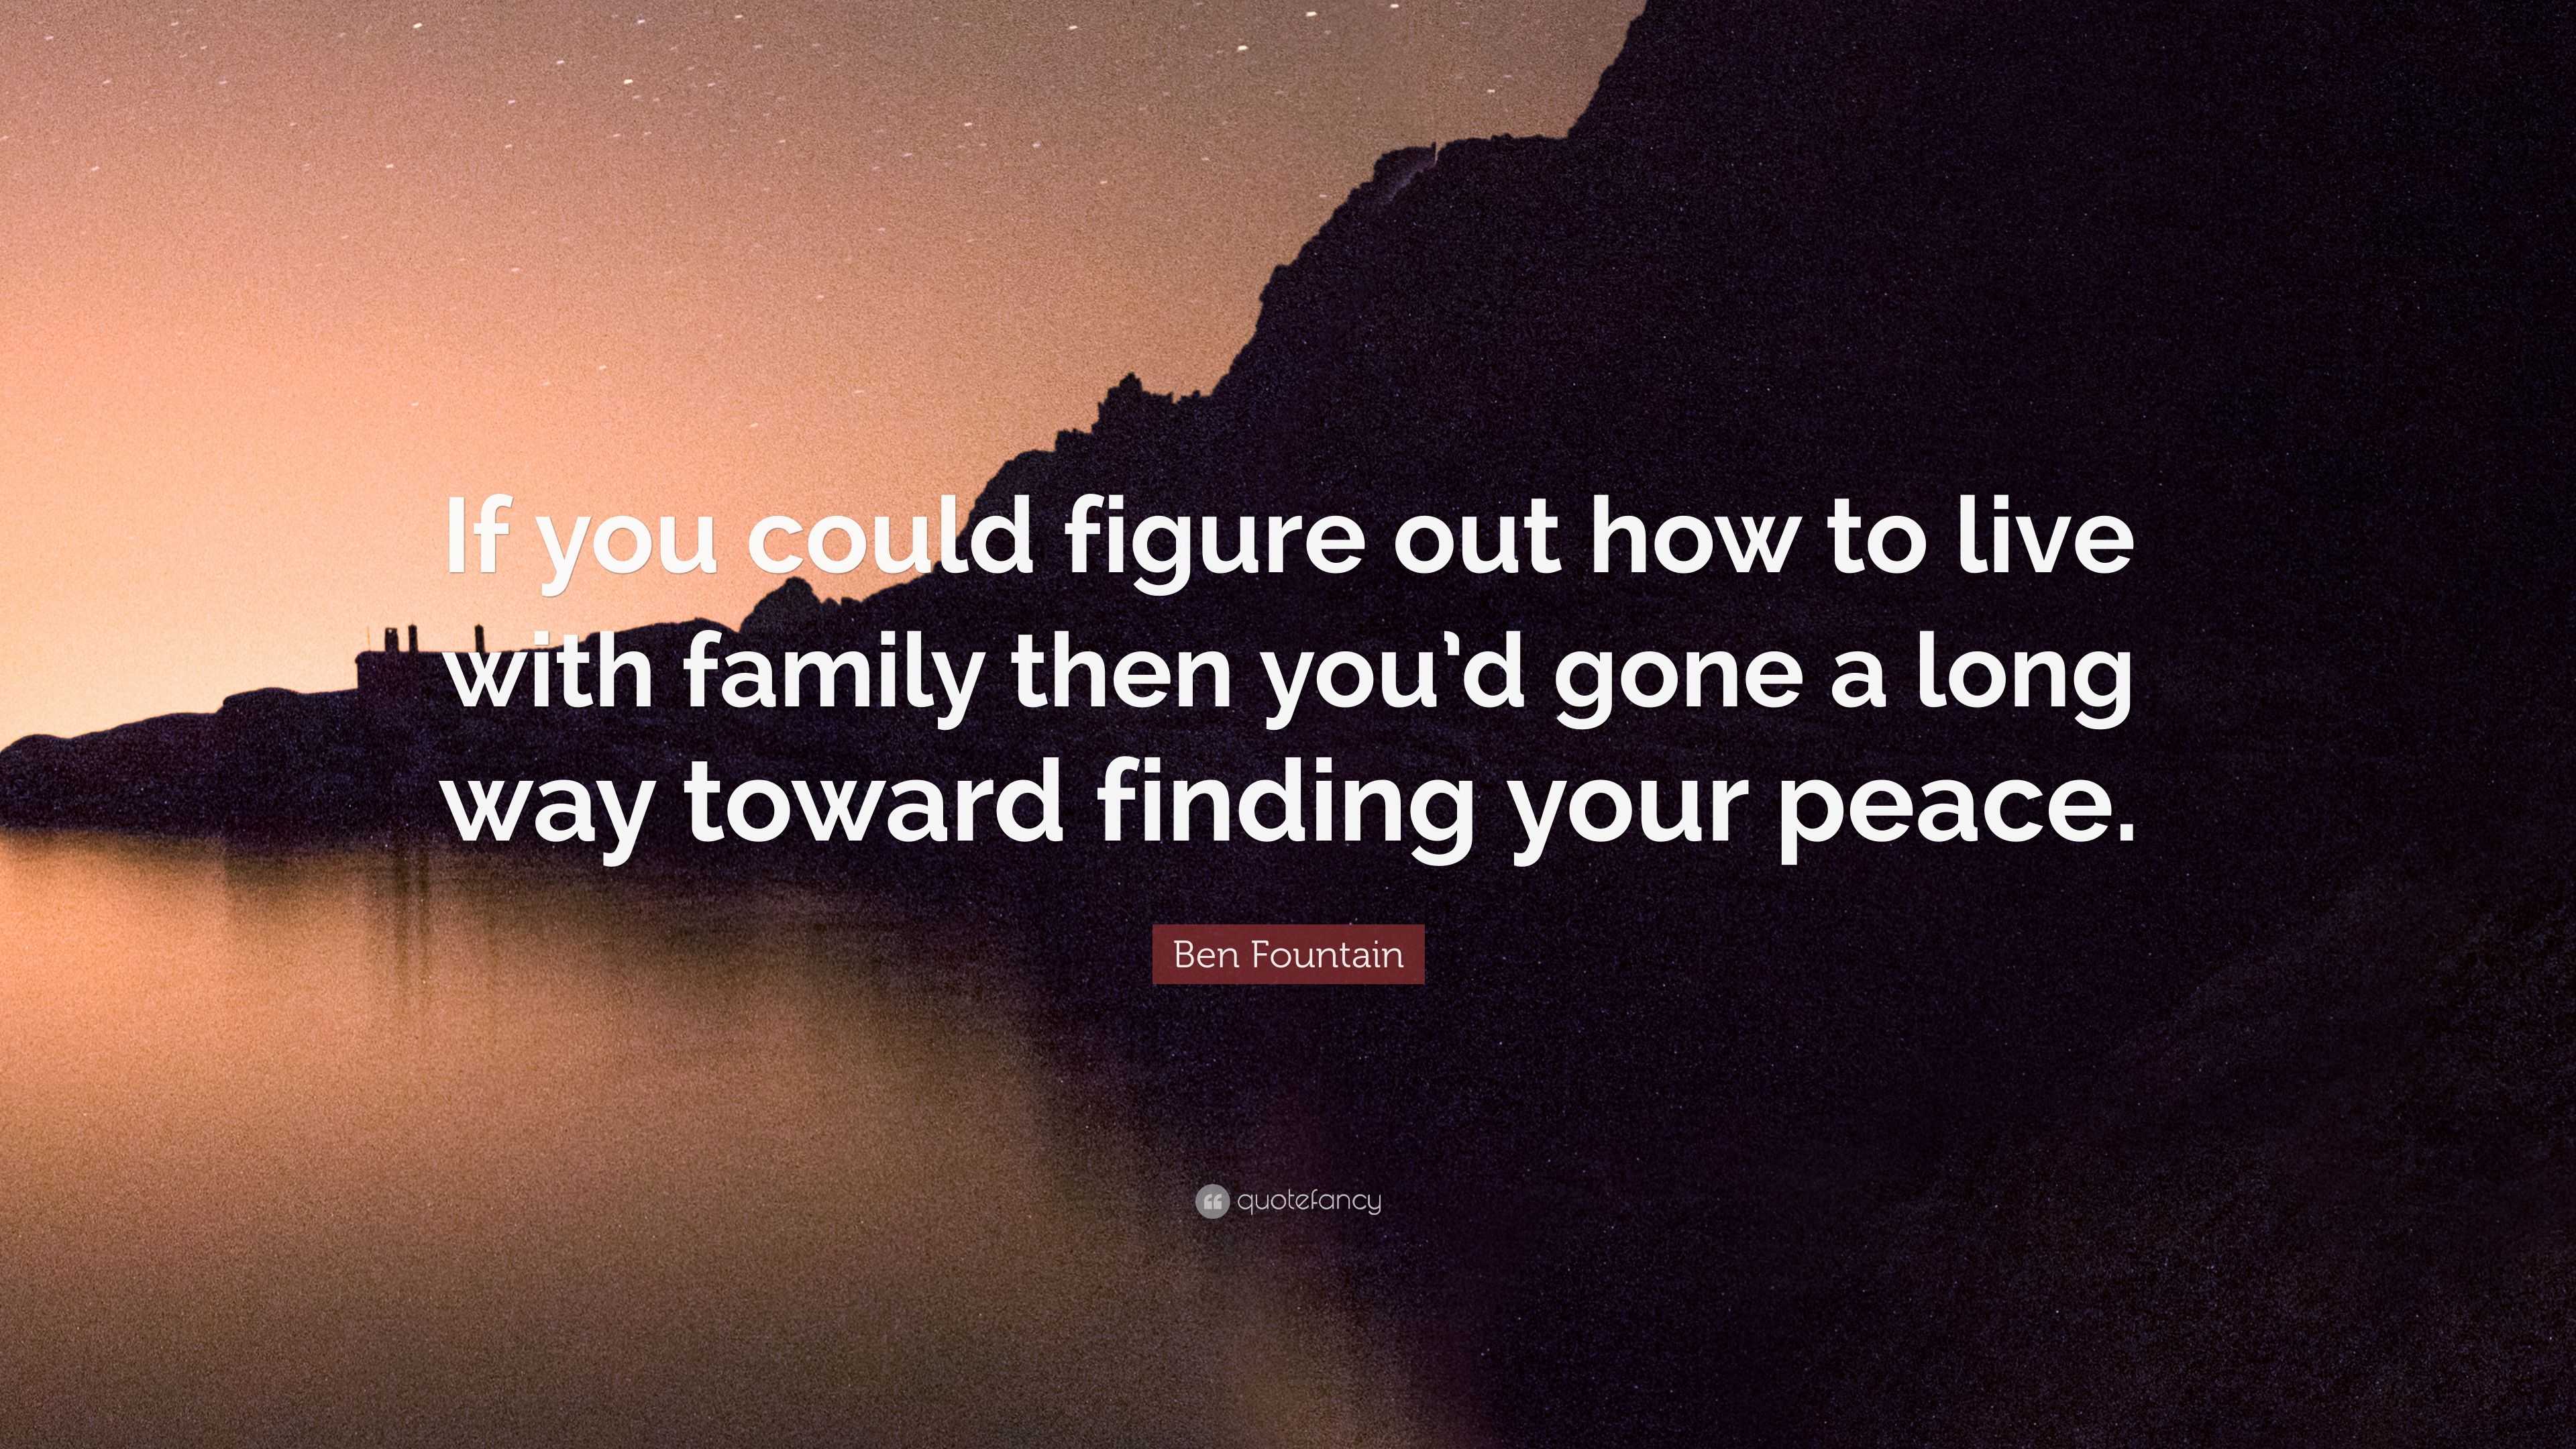 Ben Fountain Quote If You Could Figure Out How To Live With Family Then You D Gone A Long Way Toward Finding Your Peace 7 Wallpapers Quotefancy